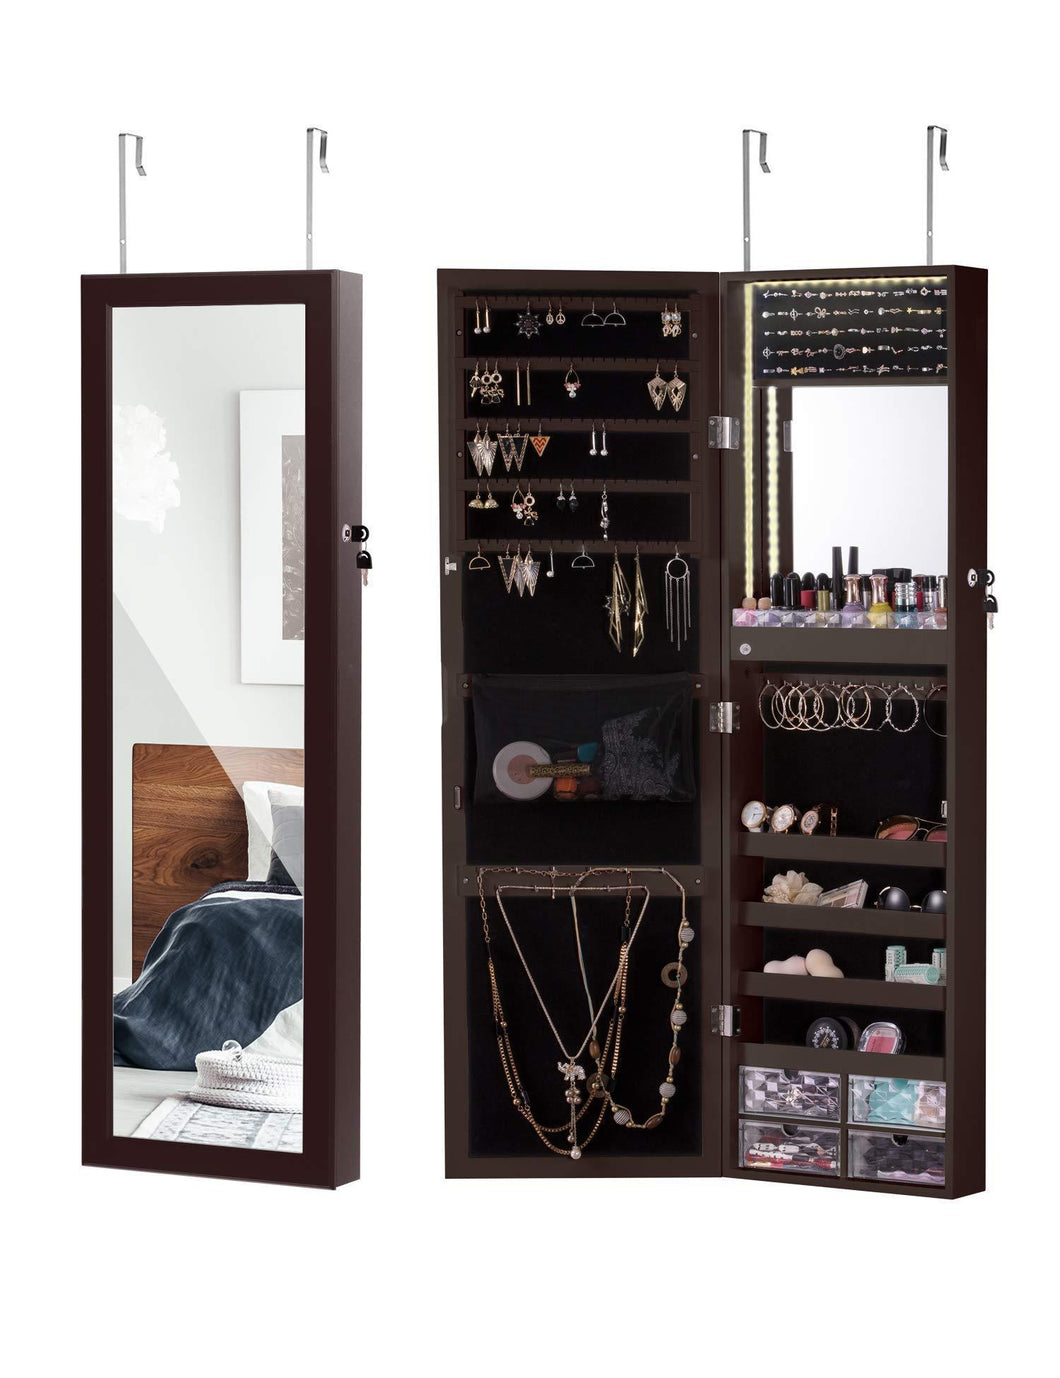 Discover luxfurni led light jewelry cabinet wall mount door hanging mirror makeup lockable armoire large storage organizer w drawers